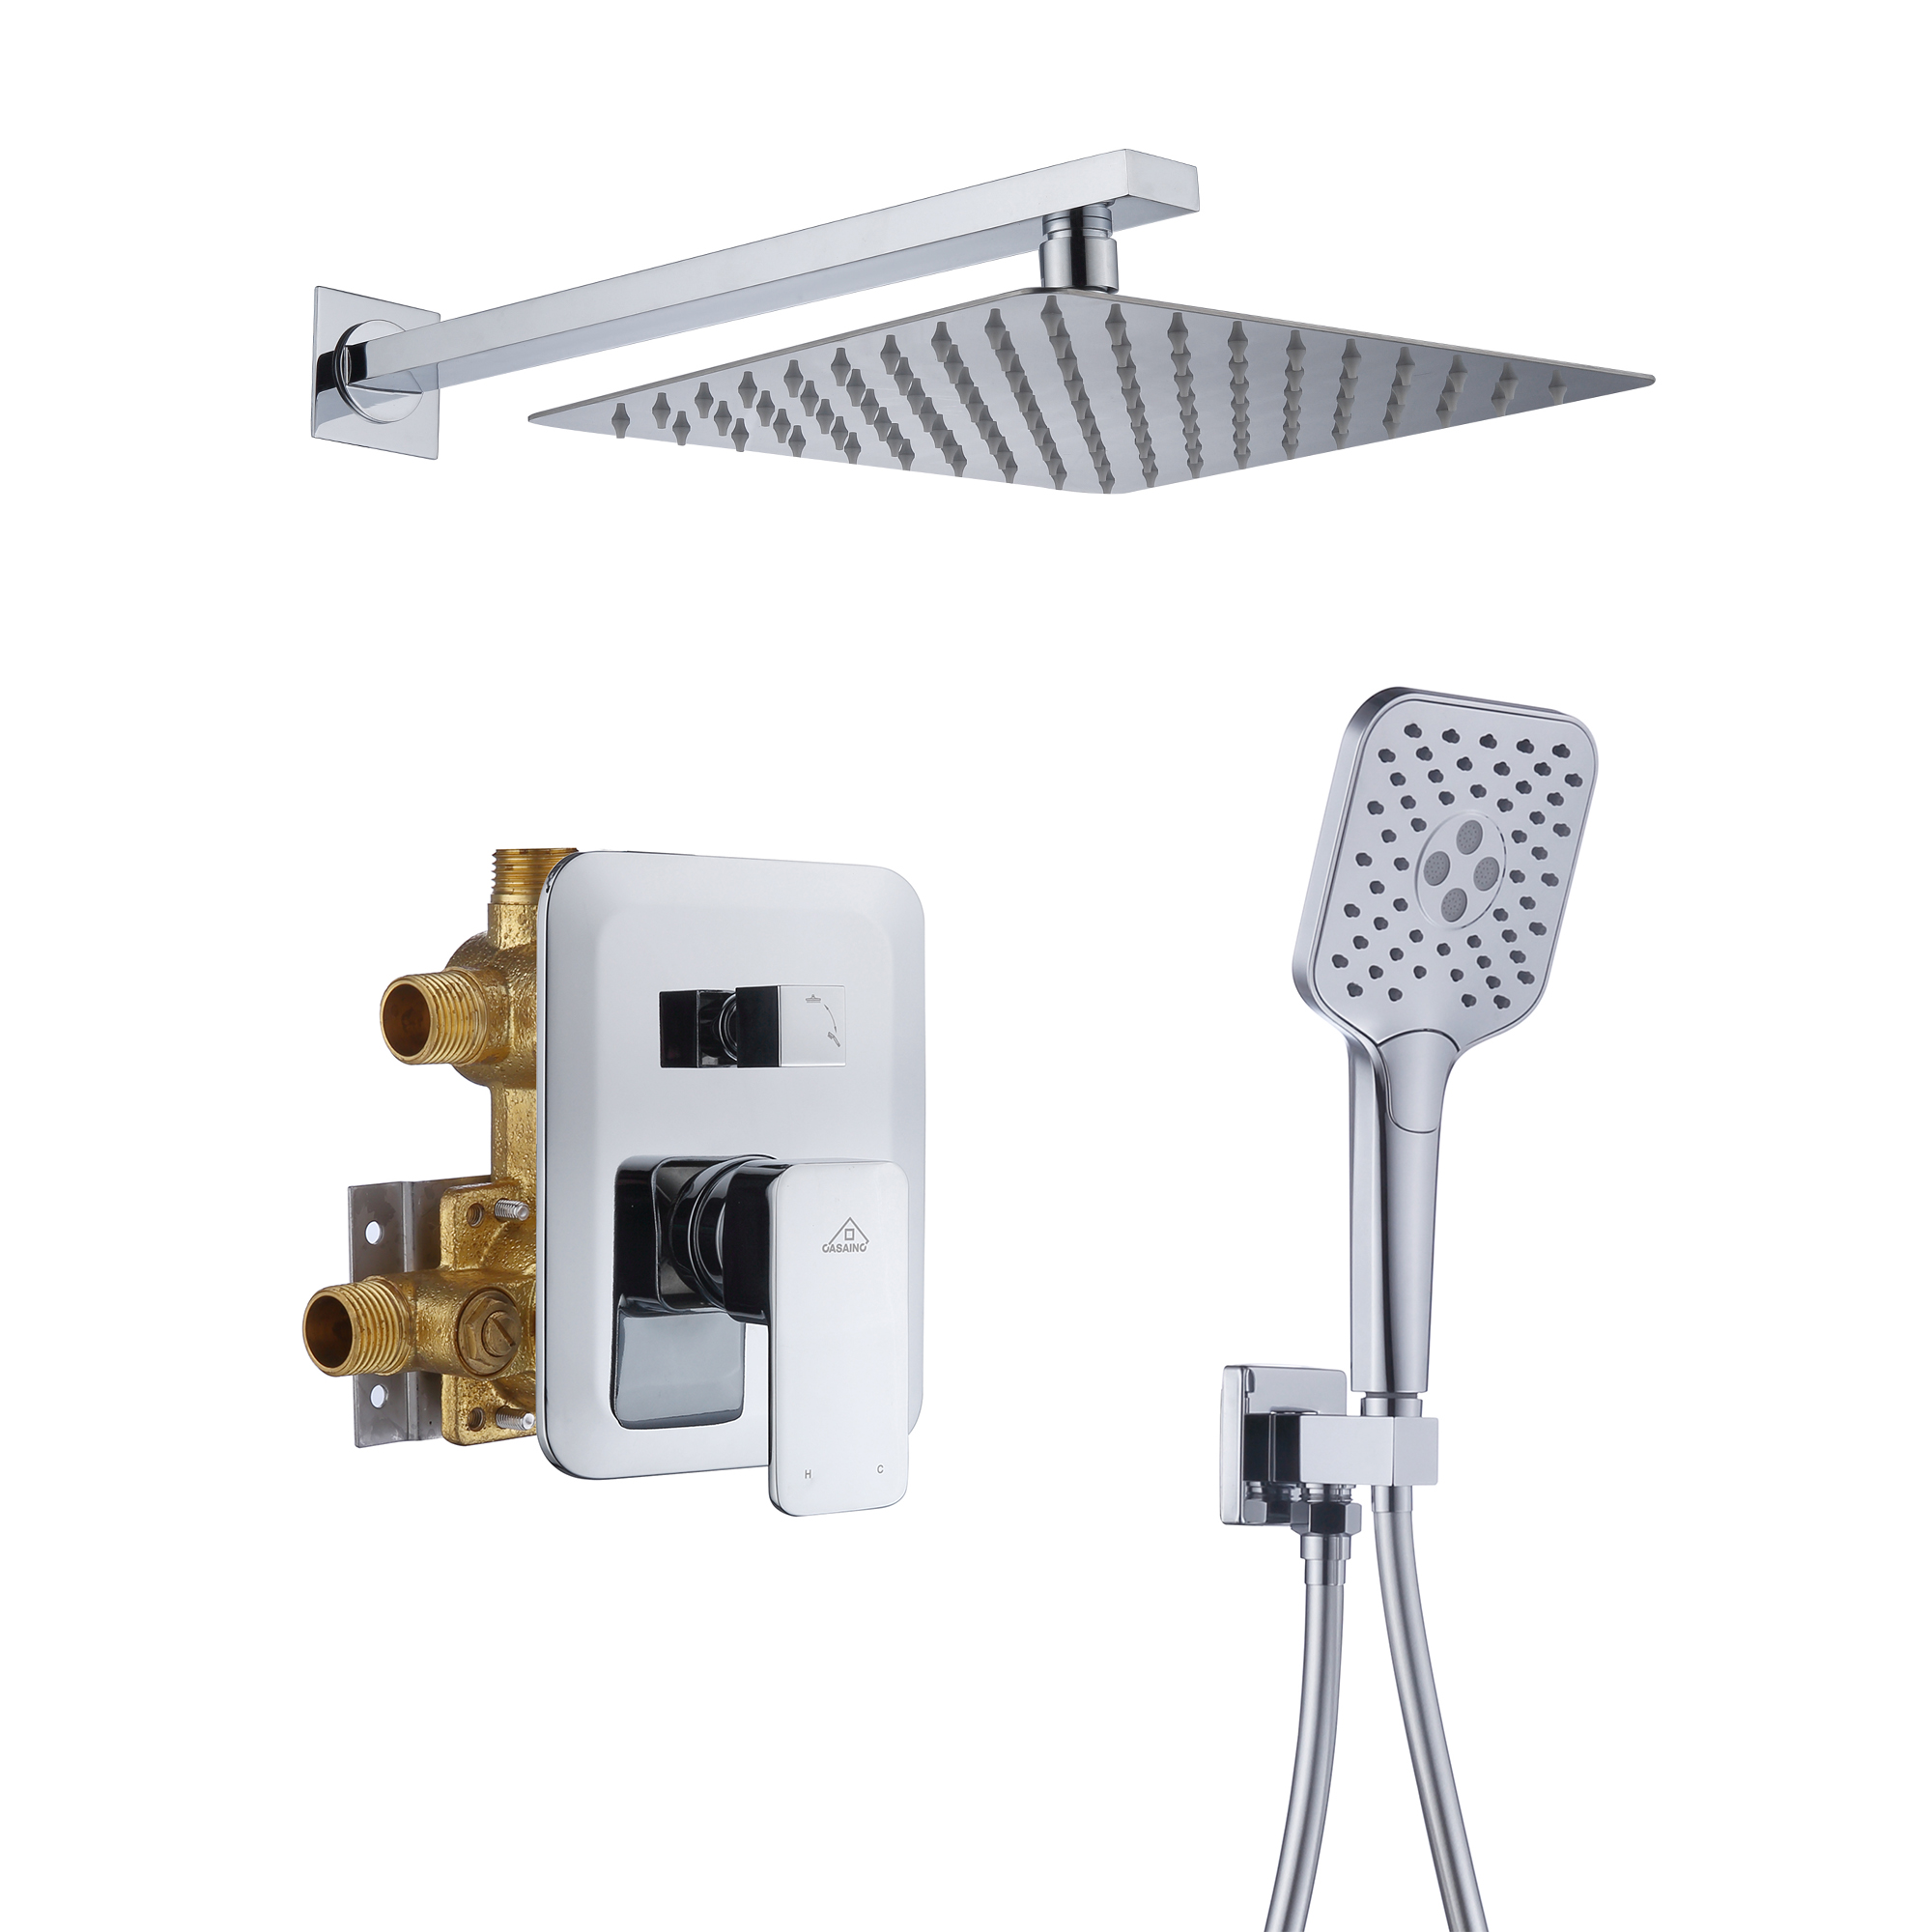 9.8"*9.8" Square Wall-mounted rain shower faucet with pressure balanced valve-CASAINC